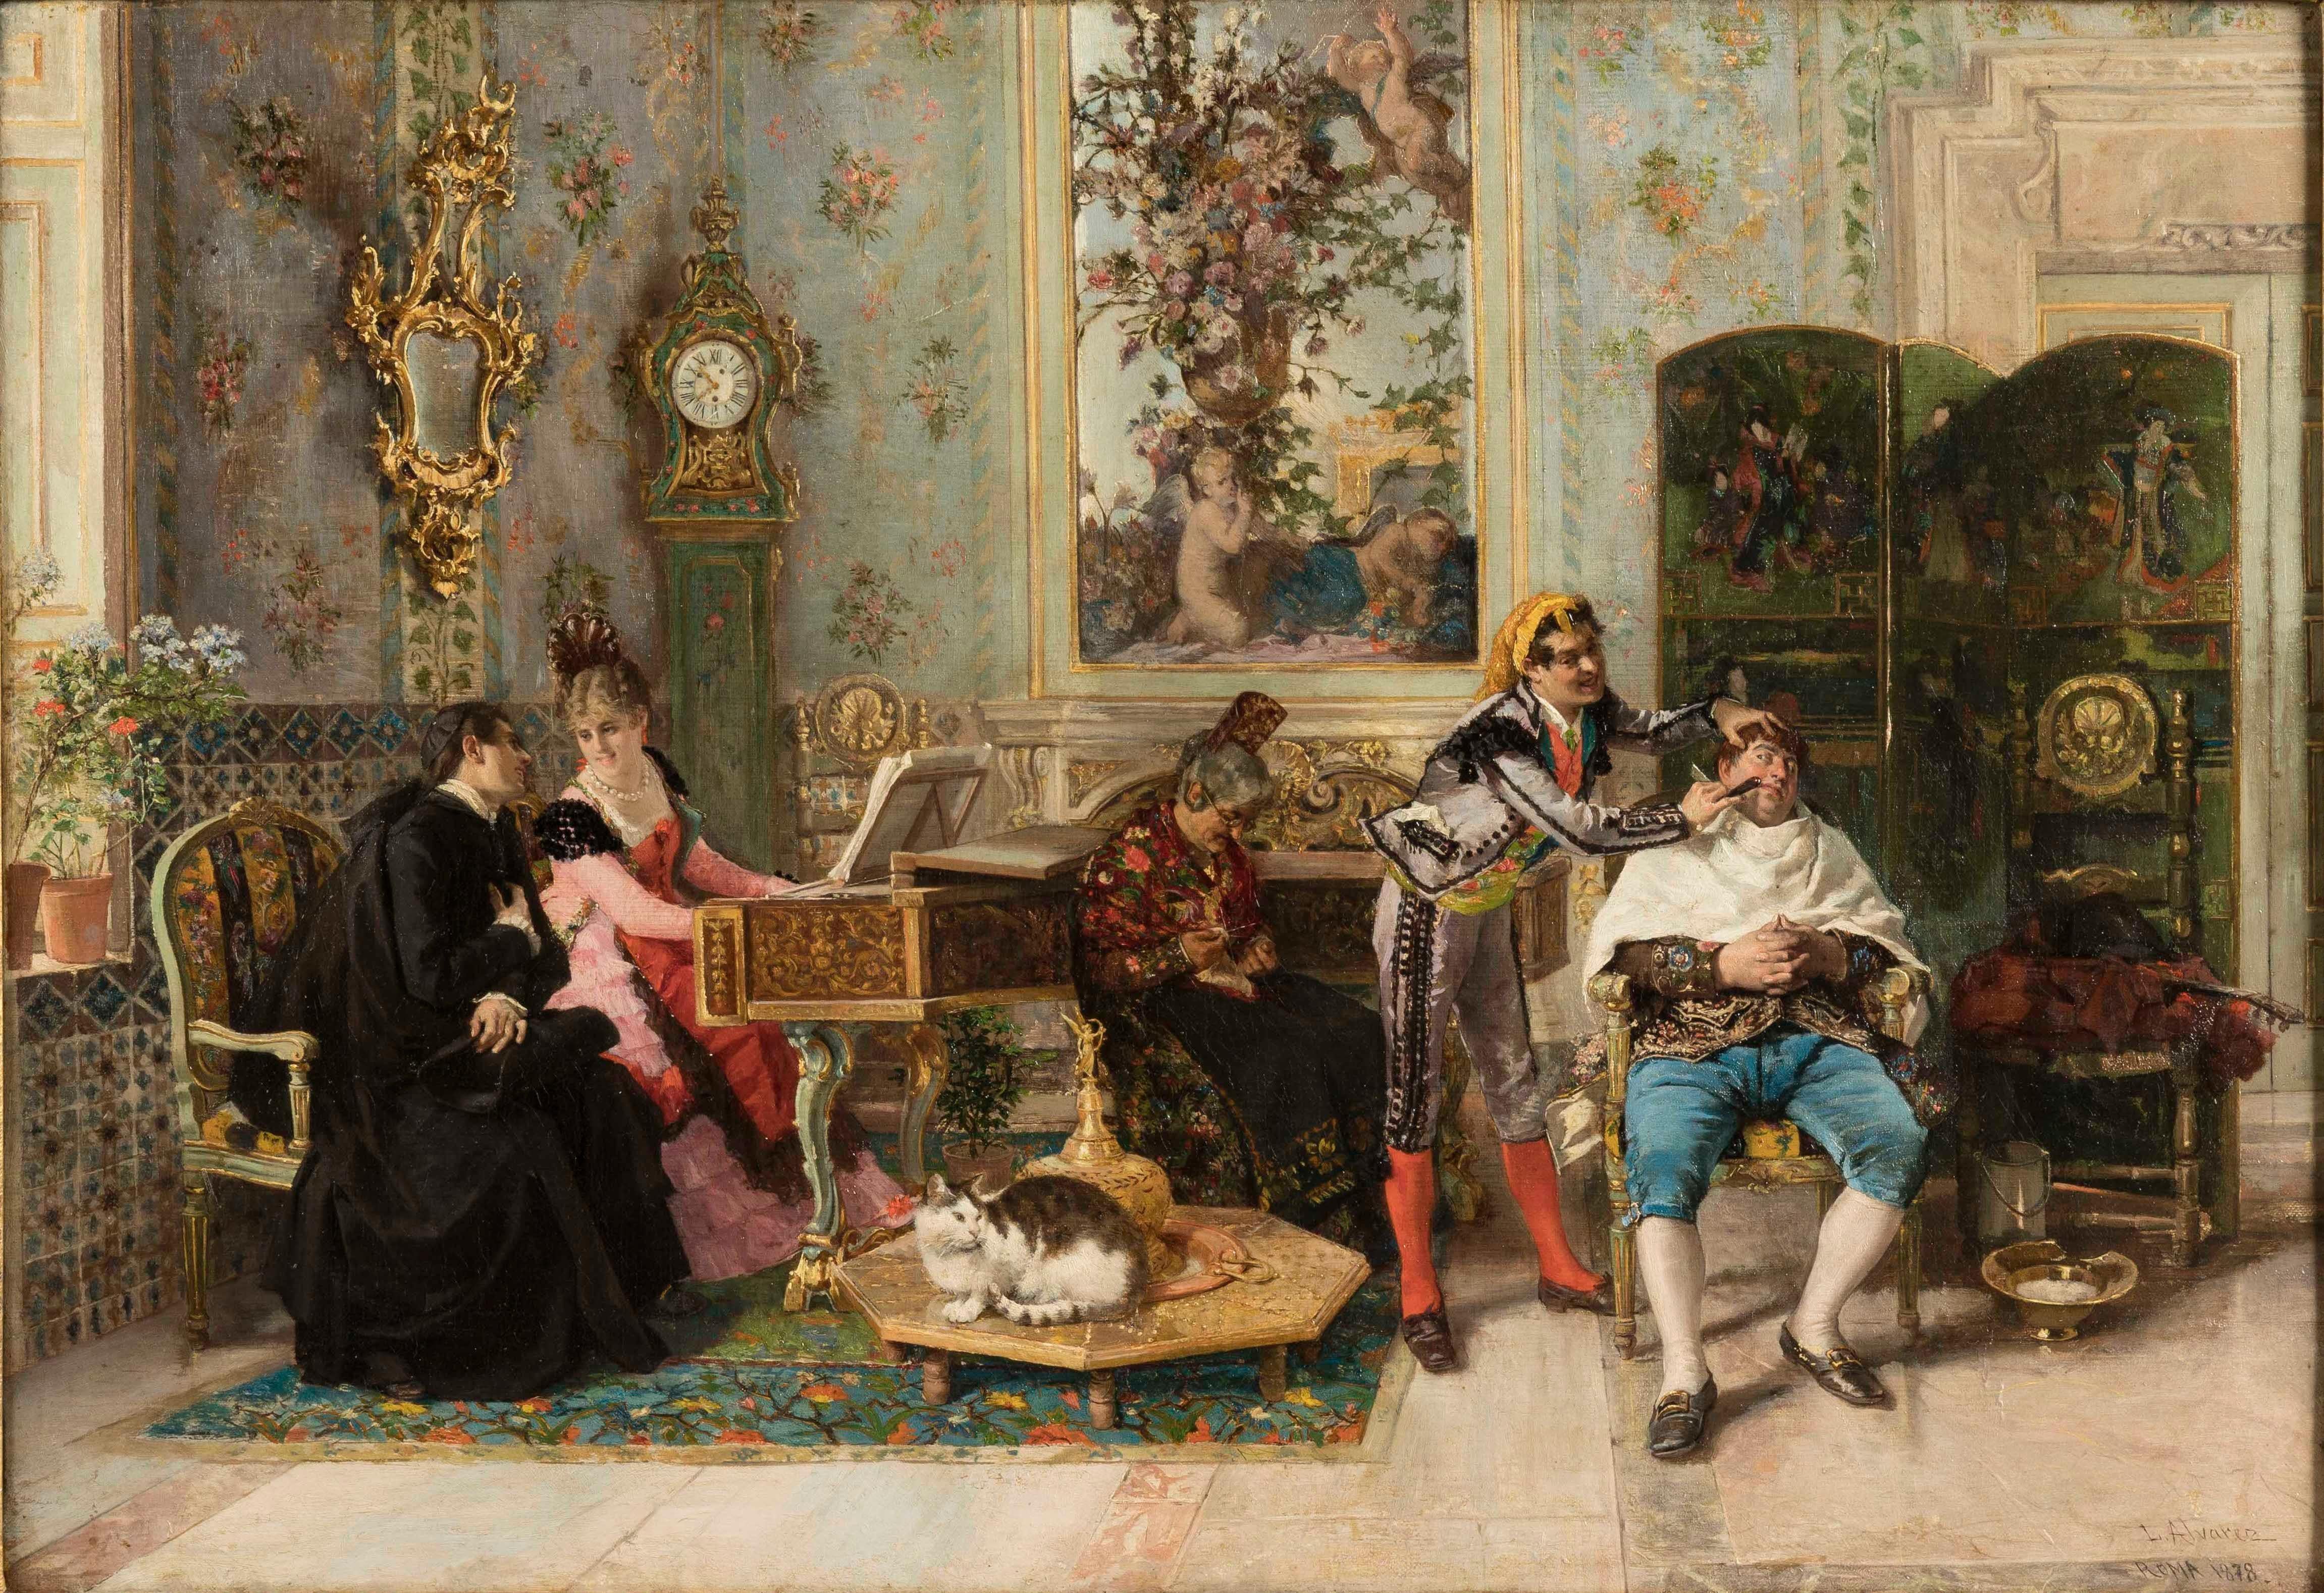 The Barber of Seville
By Luis Alvarez Catalá

Executed in oil on canvas, housed in a giltwood frame, the painting depicting an 18th century domestic scene in the Costumbrismo style including well-dressed figures such as the barber, the priest and